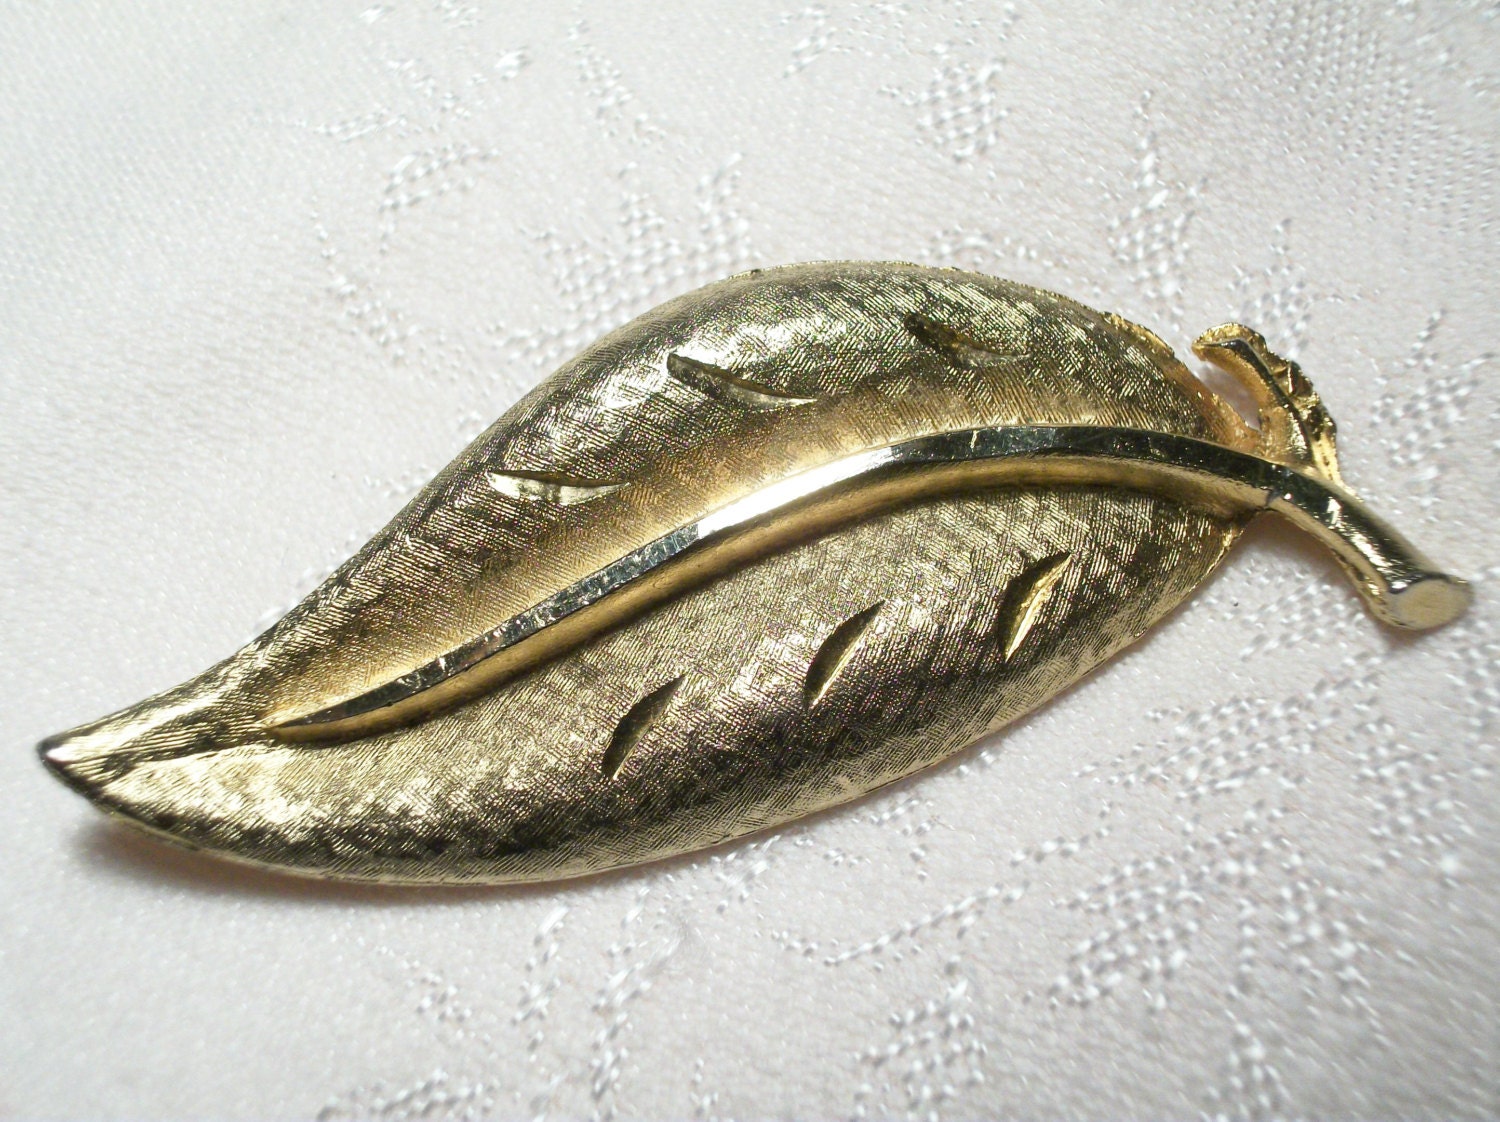 Vintage 1960's  Fashion LEAF BROOCH  Diamond Cut and Brushed Gold Metal Coat Pin Fall Jewelry - SpringJewelryThings